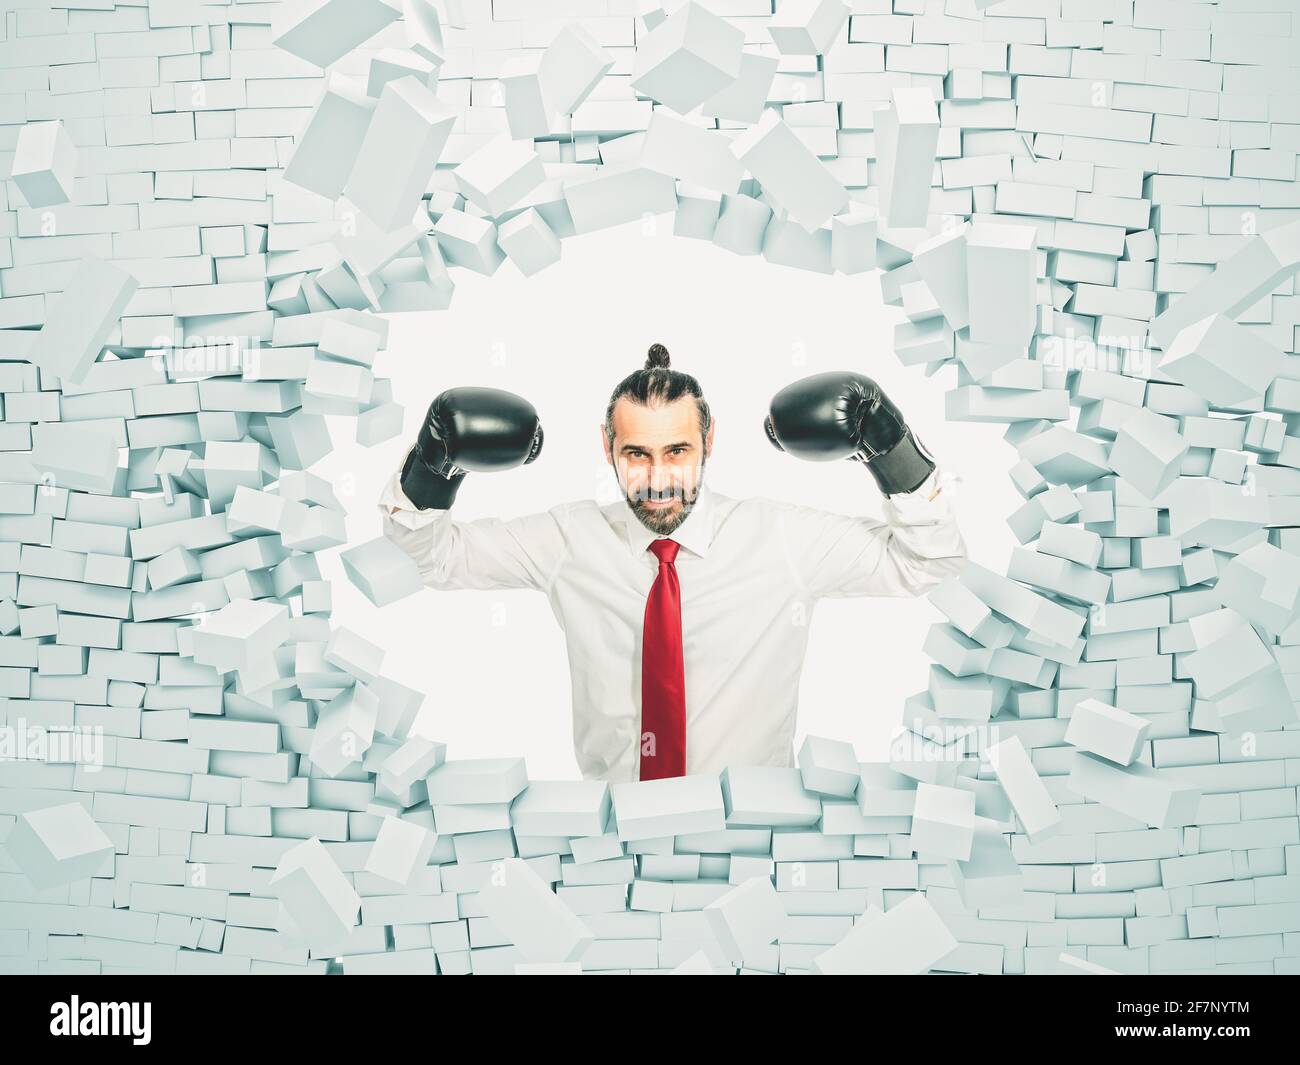 businessman with boxing gloves breaks a brick wall. concept of strength and determination. Stock Photo